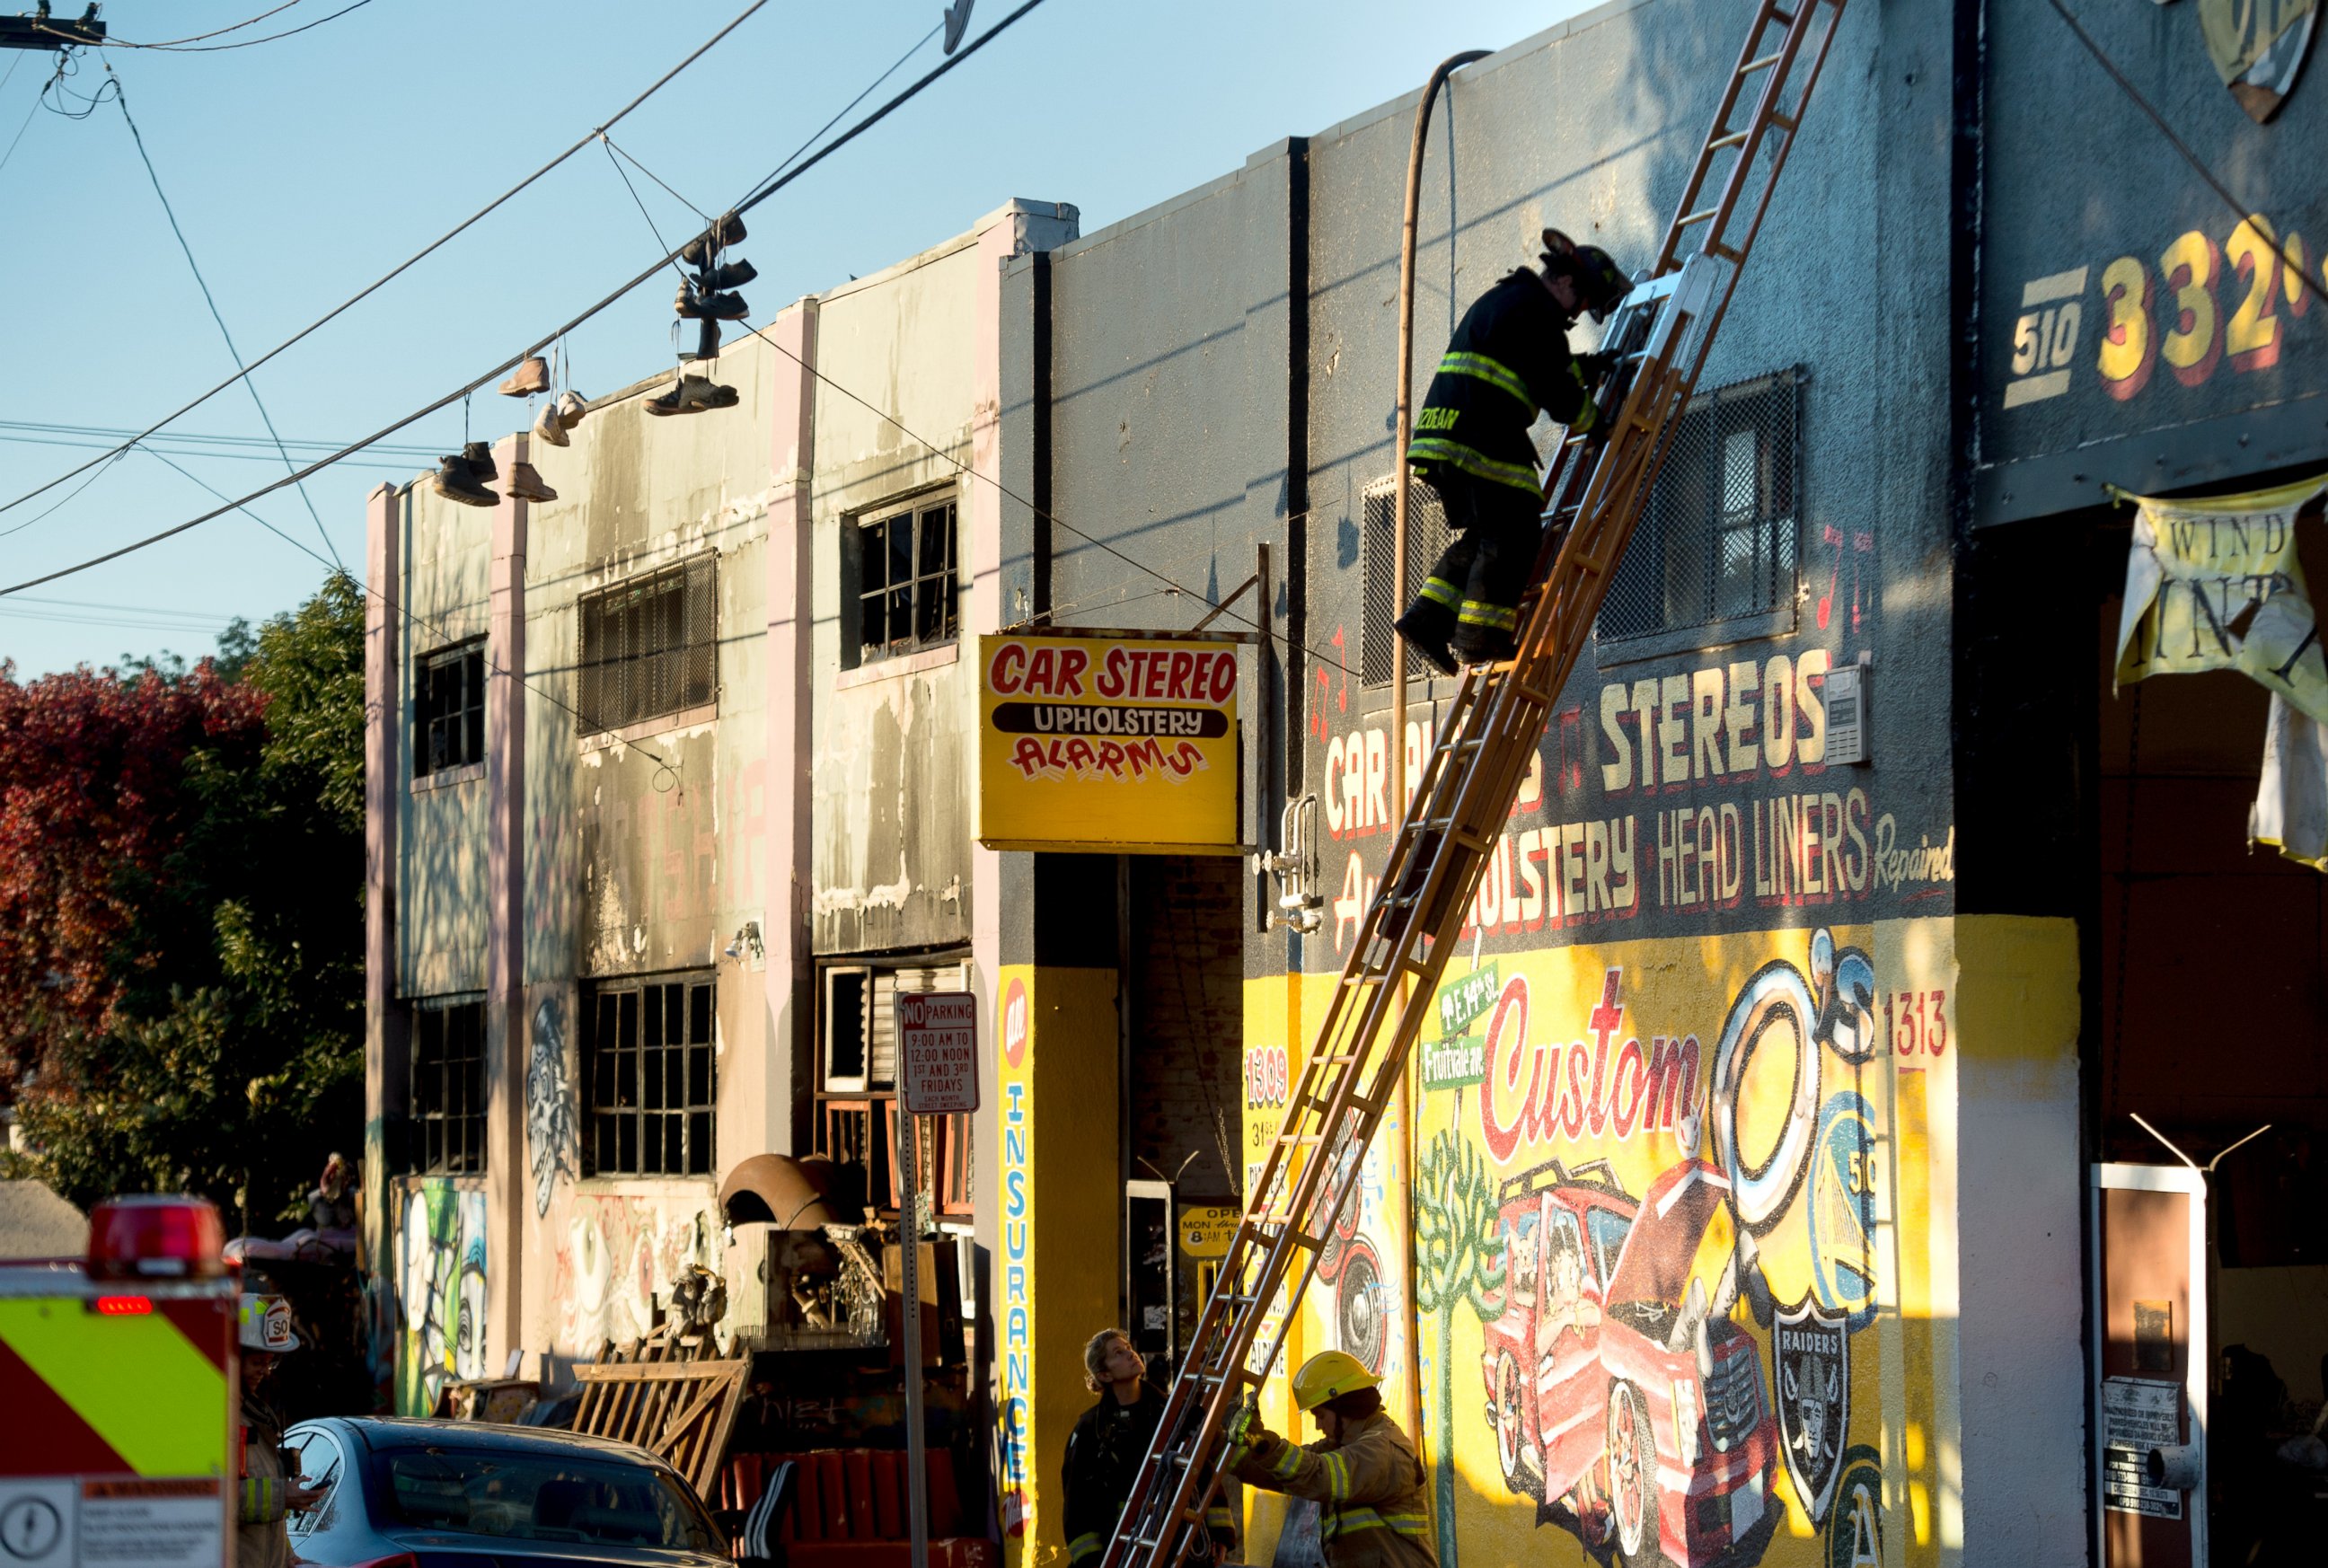 PHOTO: A firefighter climbs down a ladder at the scene of a fire that killed at least nine people on 31st St., Dec. 3, 2016, in Oakland, California. 